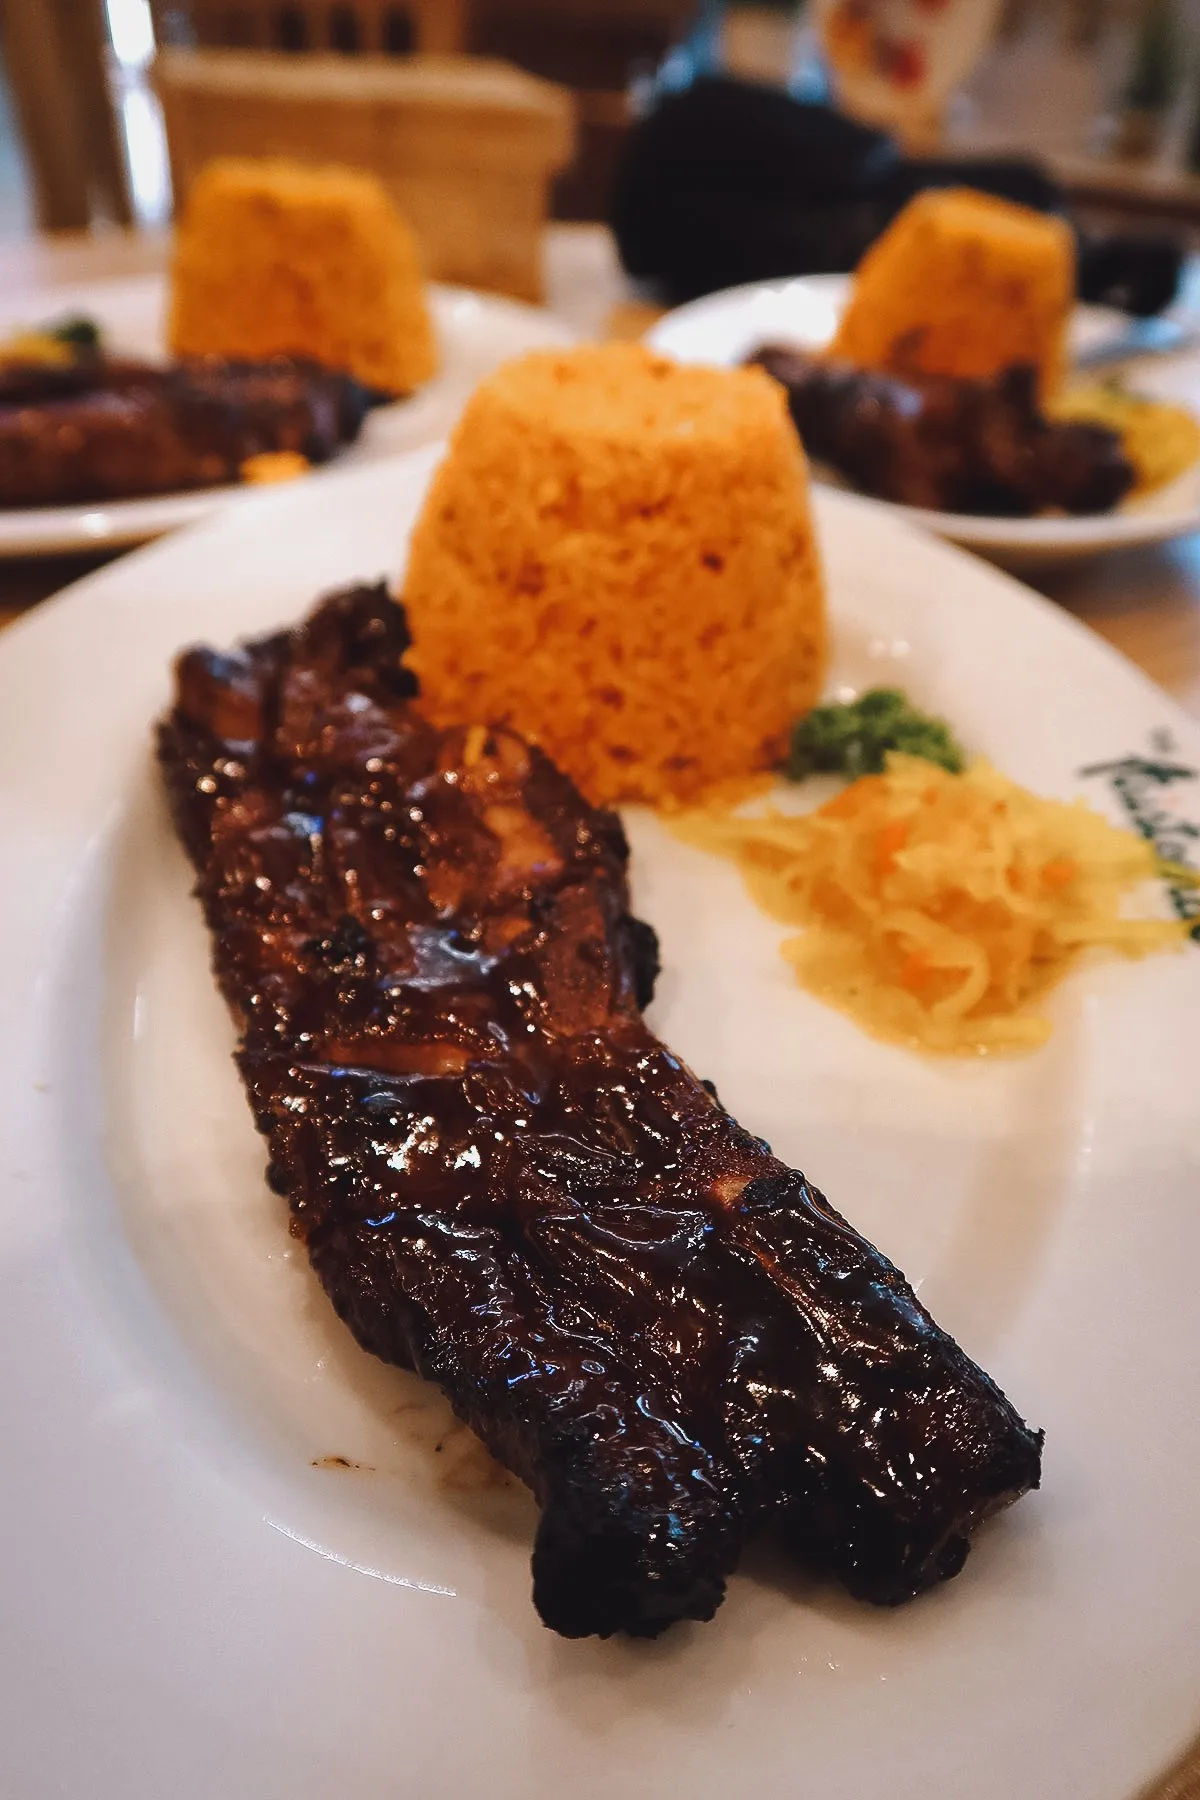 Barbecued ribs at a restaurant in Manila